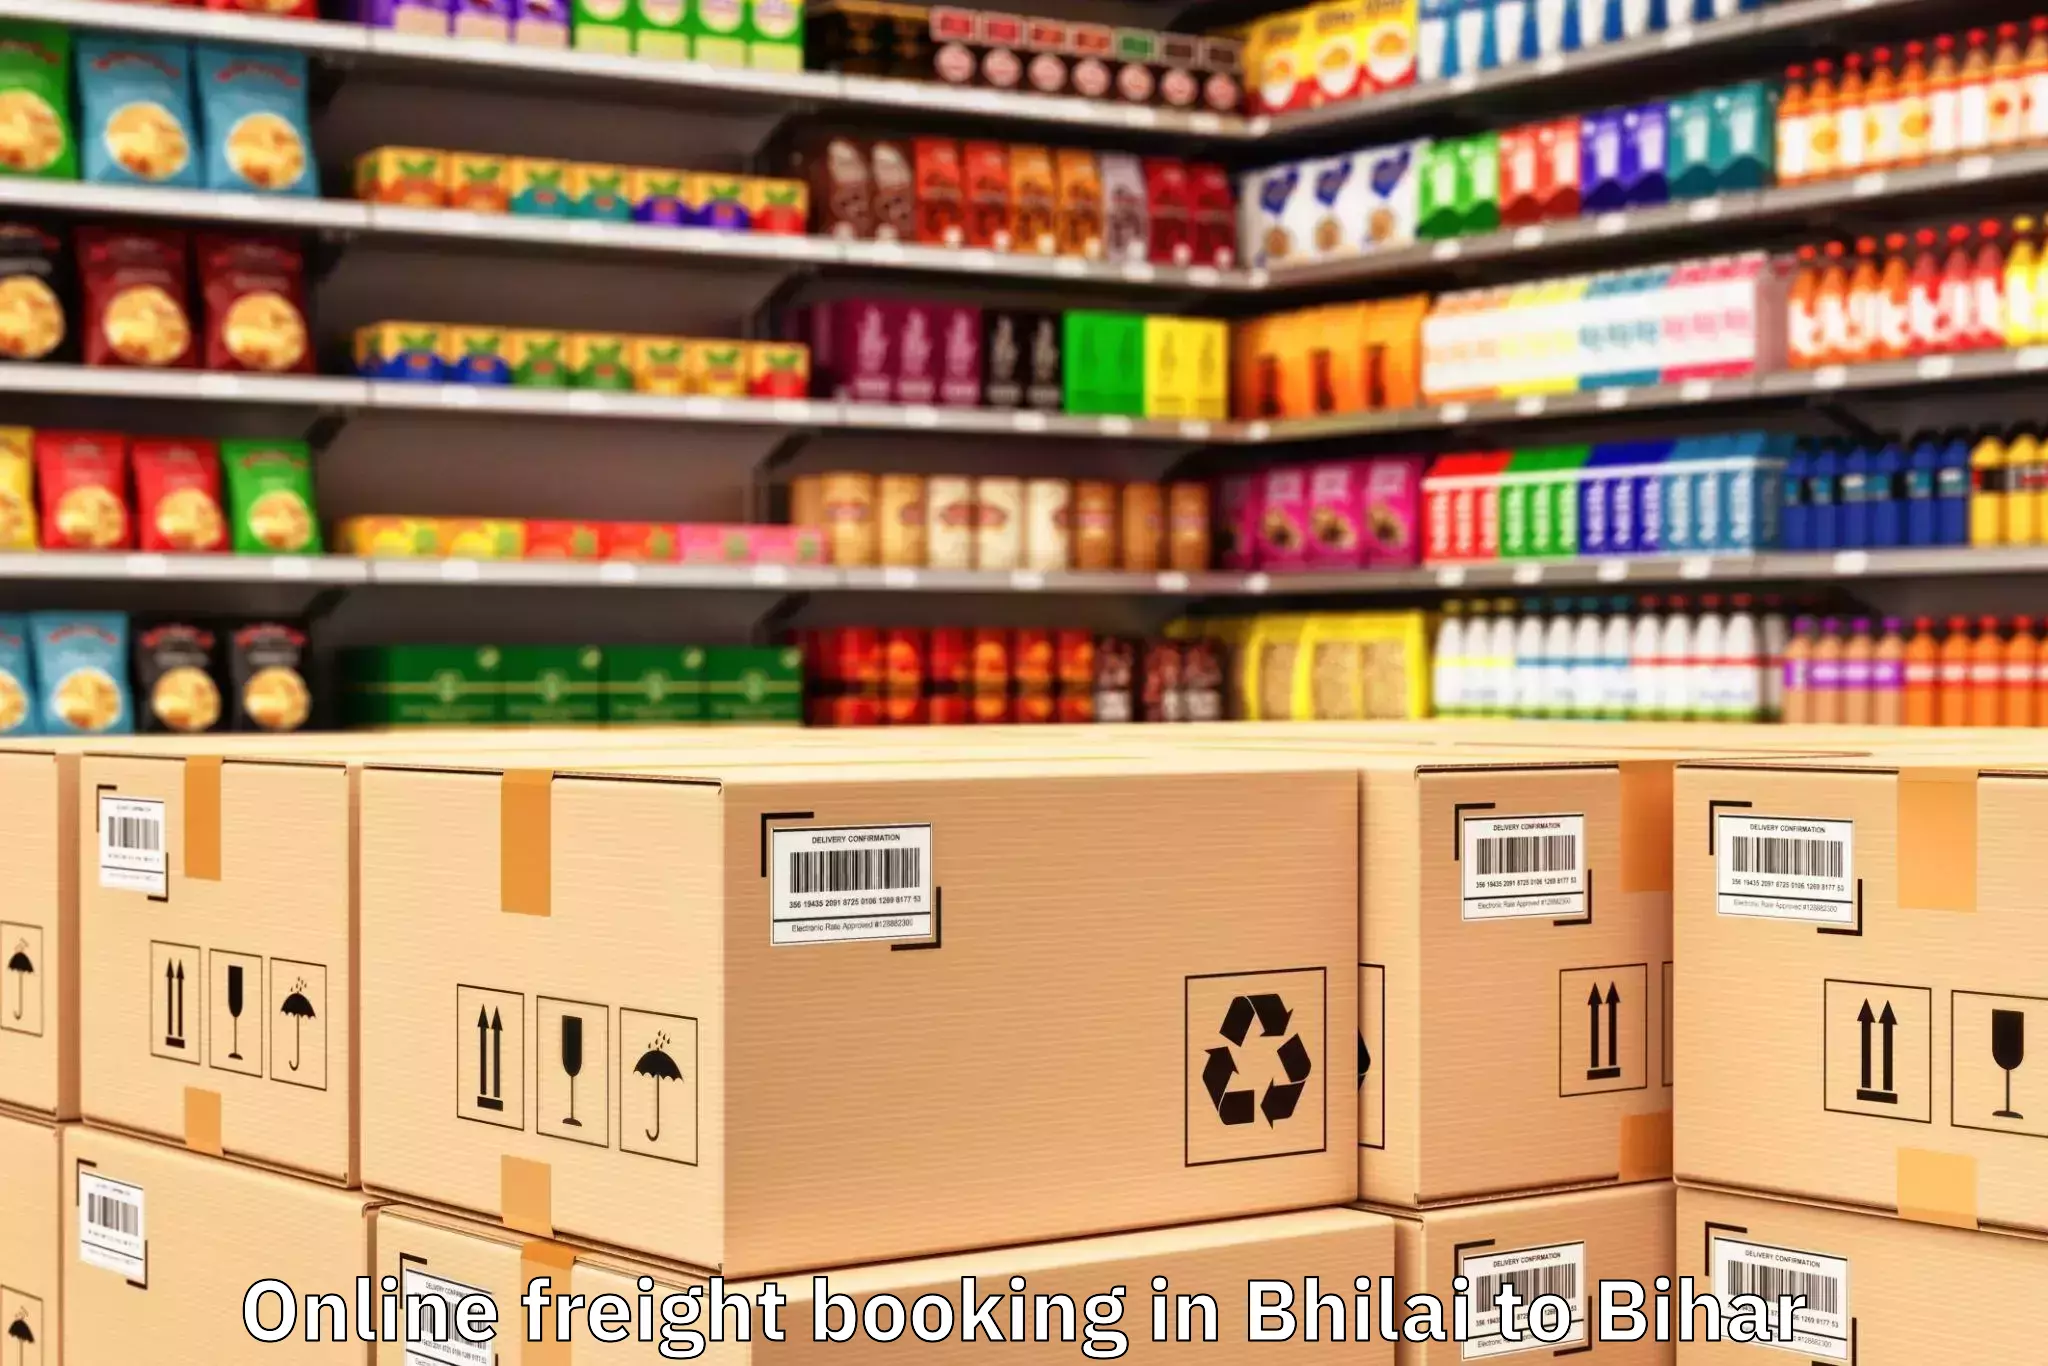 Top Bhilai to Barahat Online Freight Booking Available